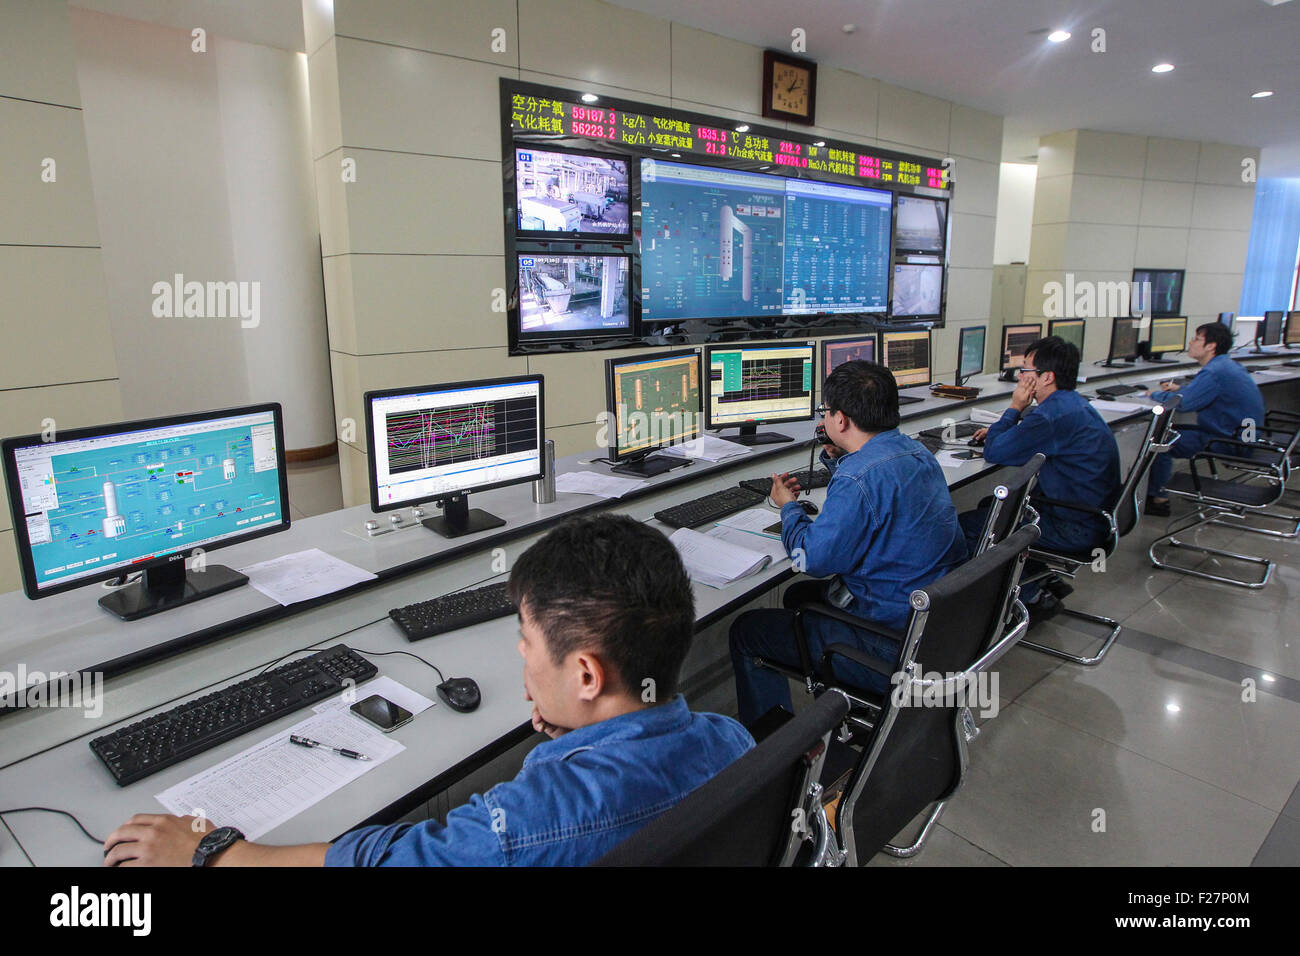 Tianjin Integrated Gasification Combined Cycle Power Plant Project control room July 23, 2015 in Tianjin, China. Stock Photo